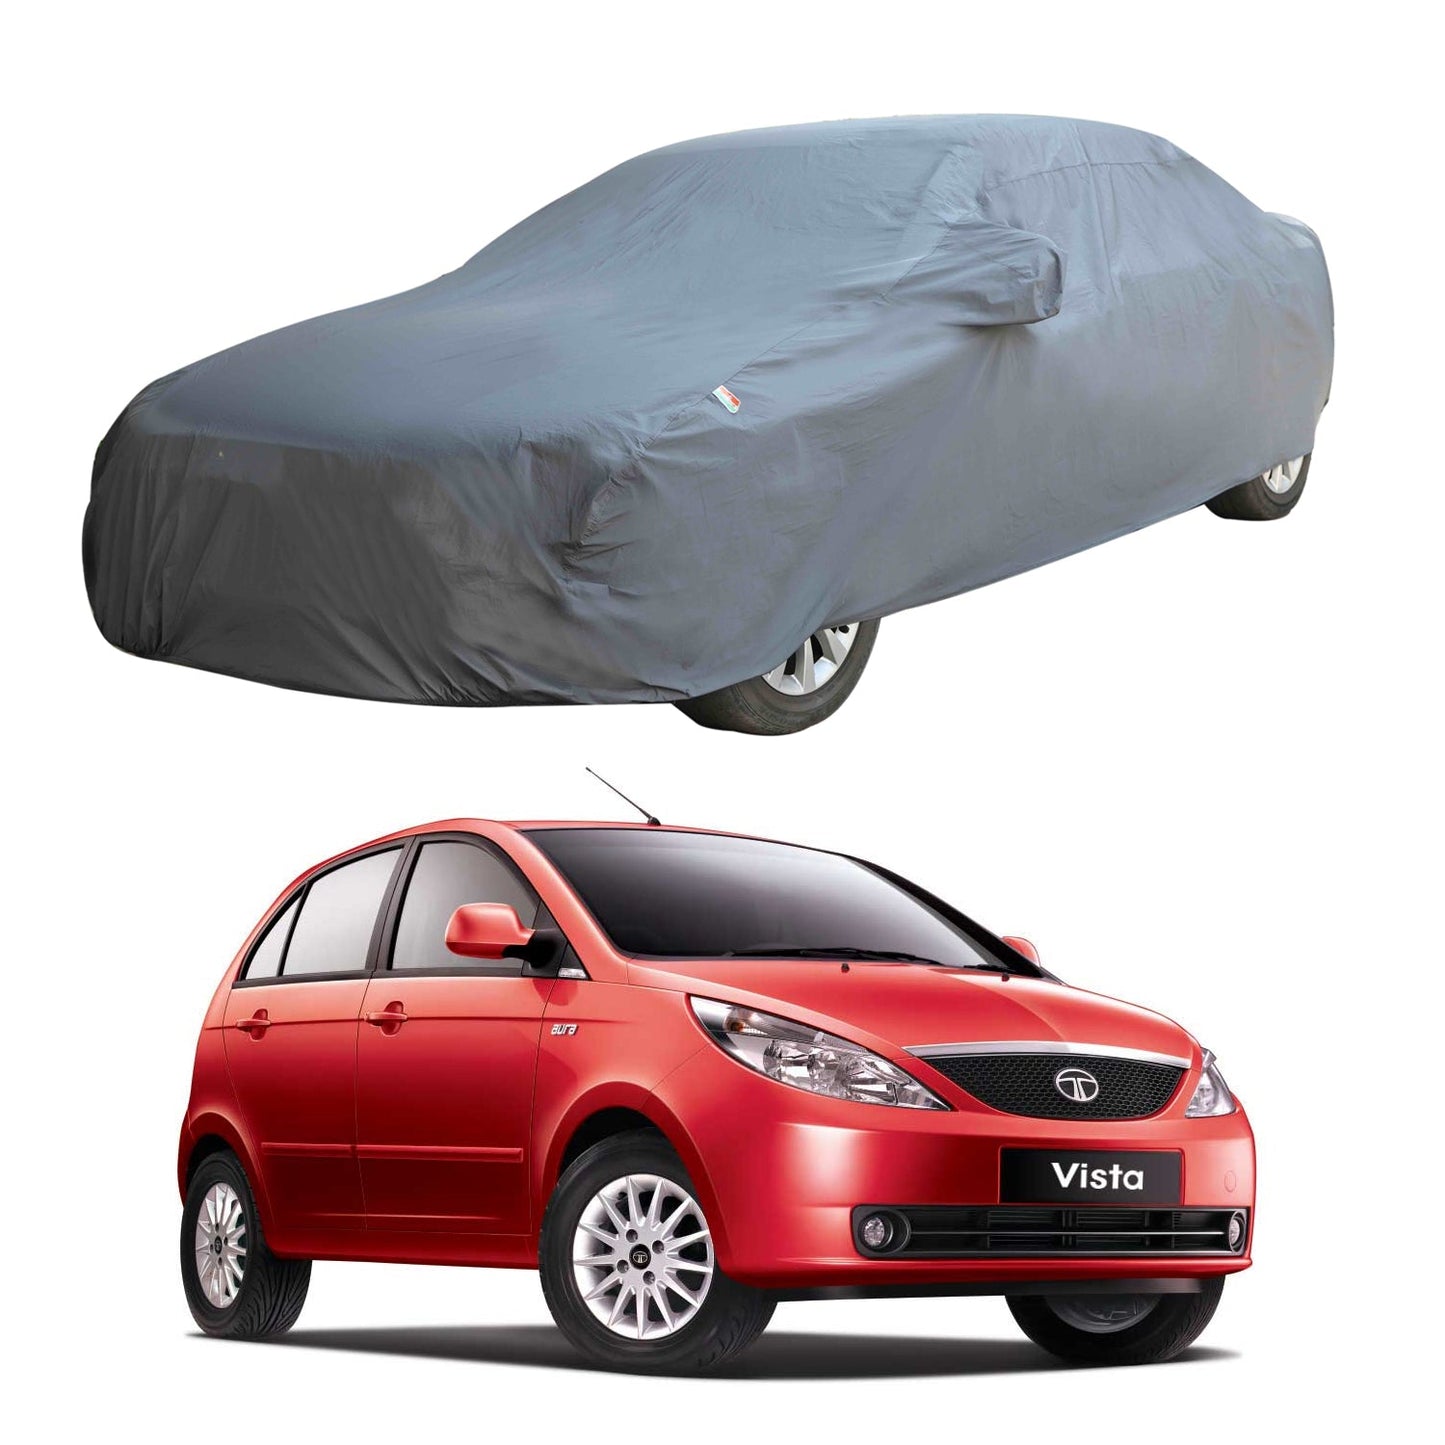 Oshotto Dark Grey 100% Anti Reflective, dustproof and Water Proof Car Body Cover with Mirror Pockets For Tata Indica Vista/Bolt